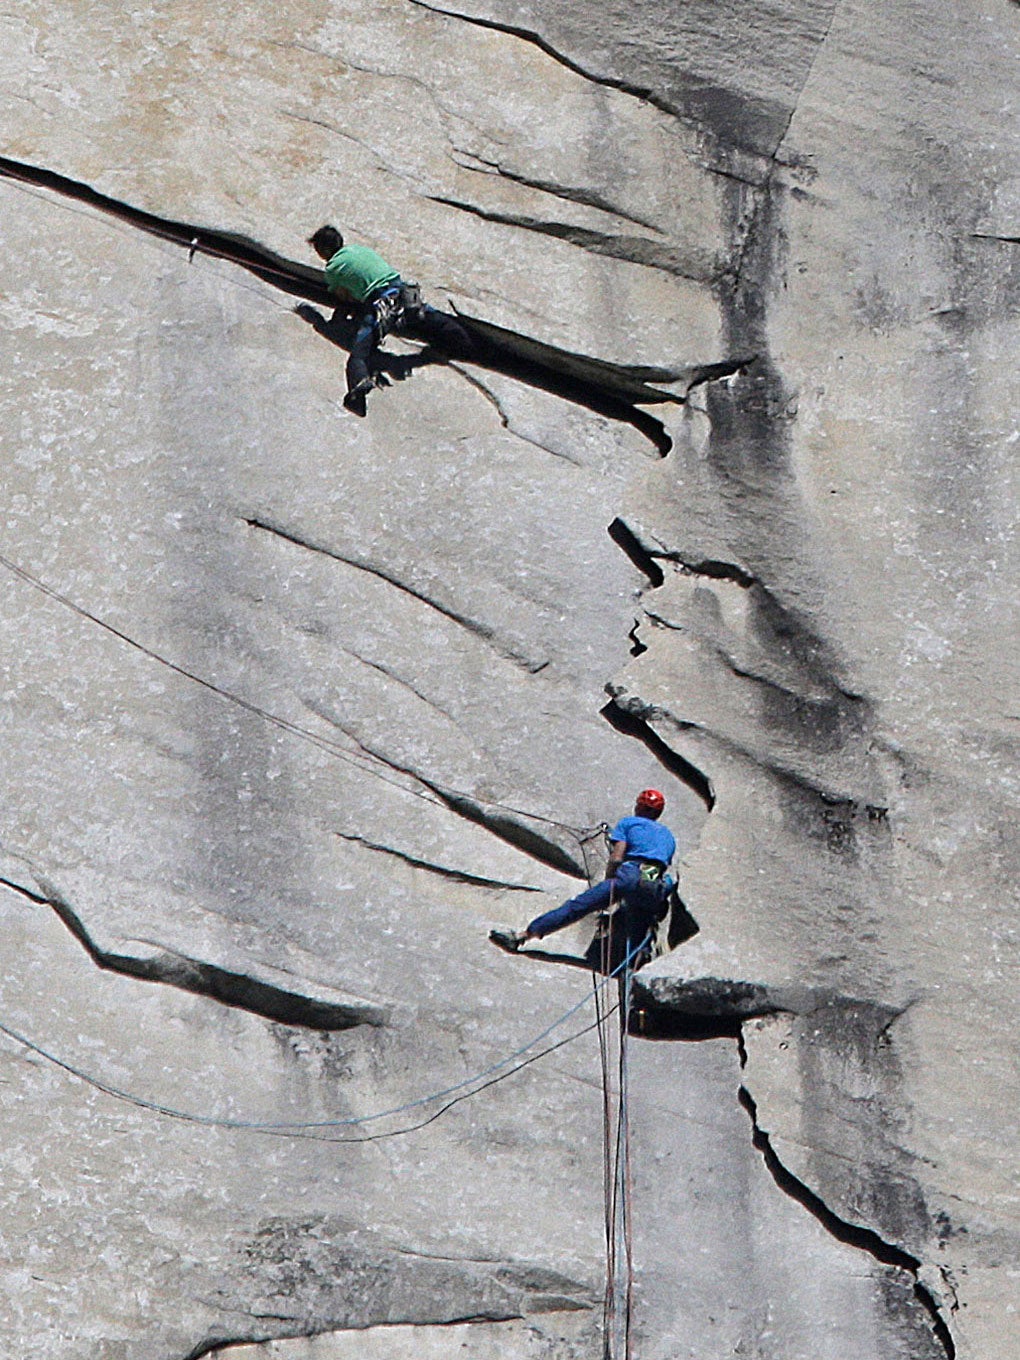 Kevin Jorgeson of California, wearing green, and 36-year-old Tommy Caldwell, wearing blue, near the summit of El Capitan